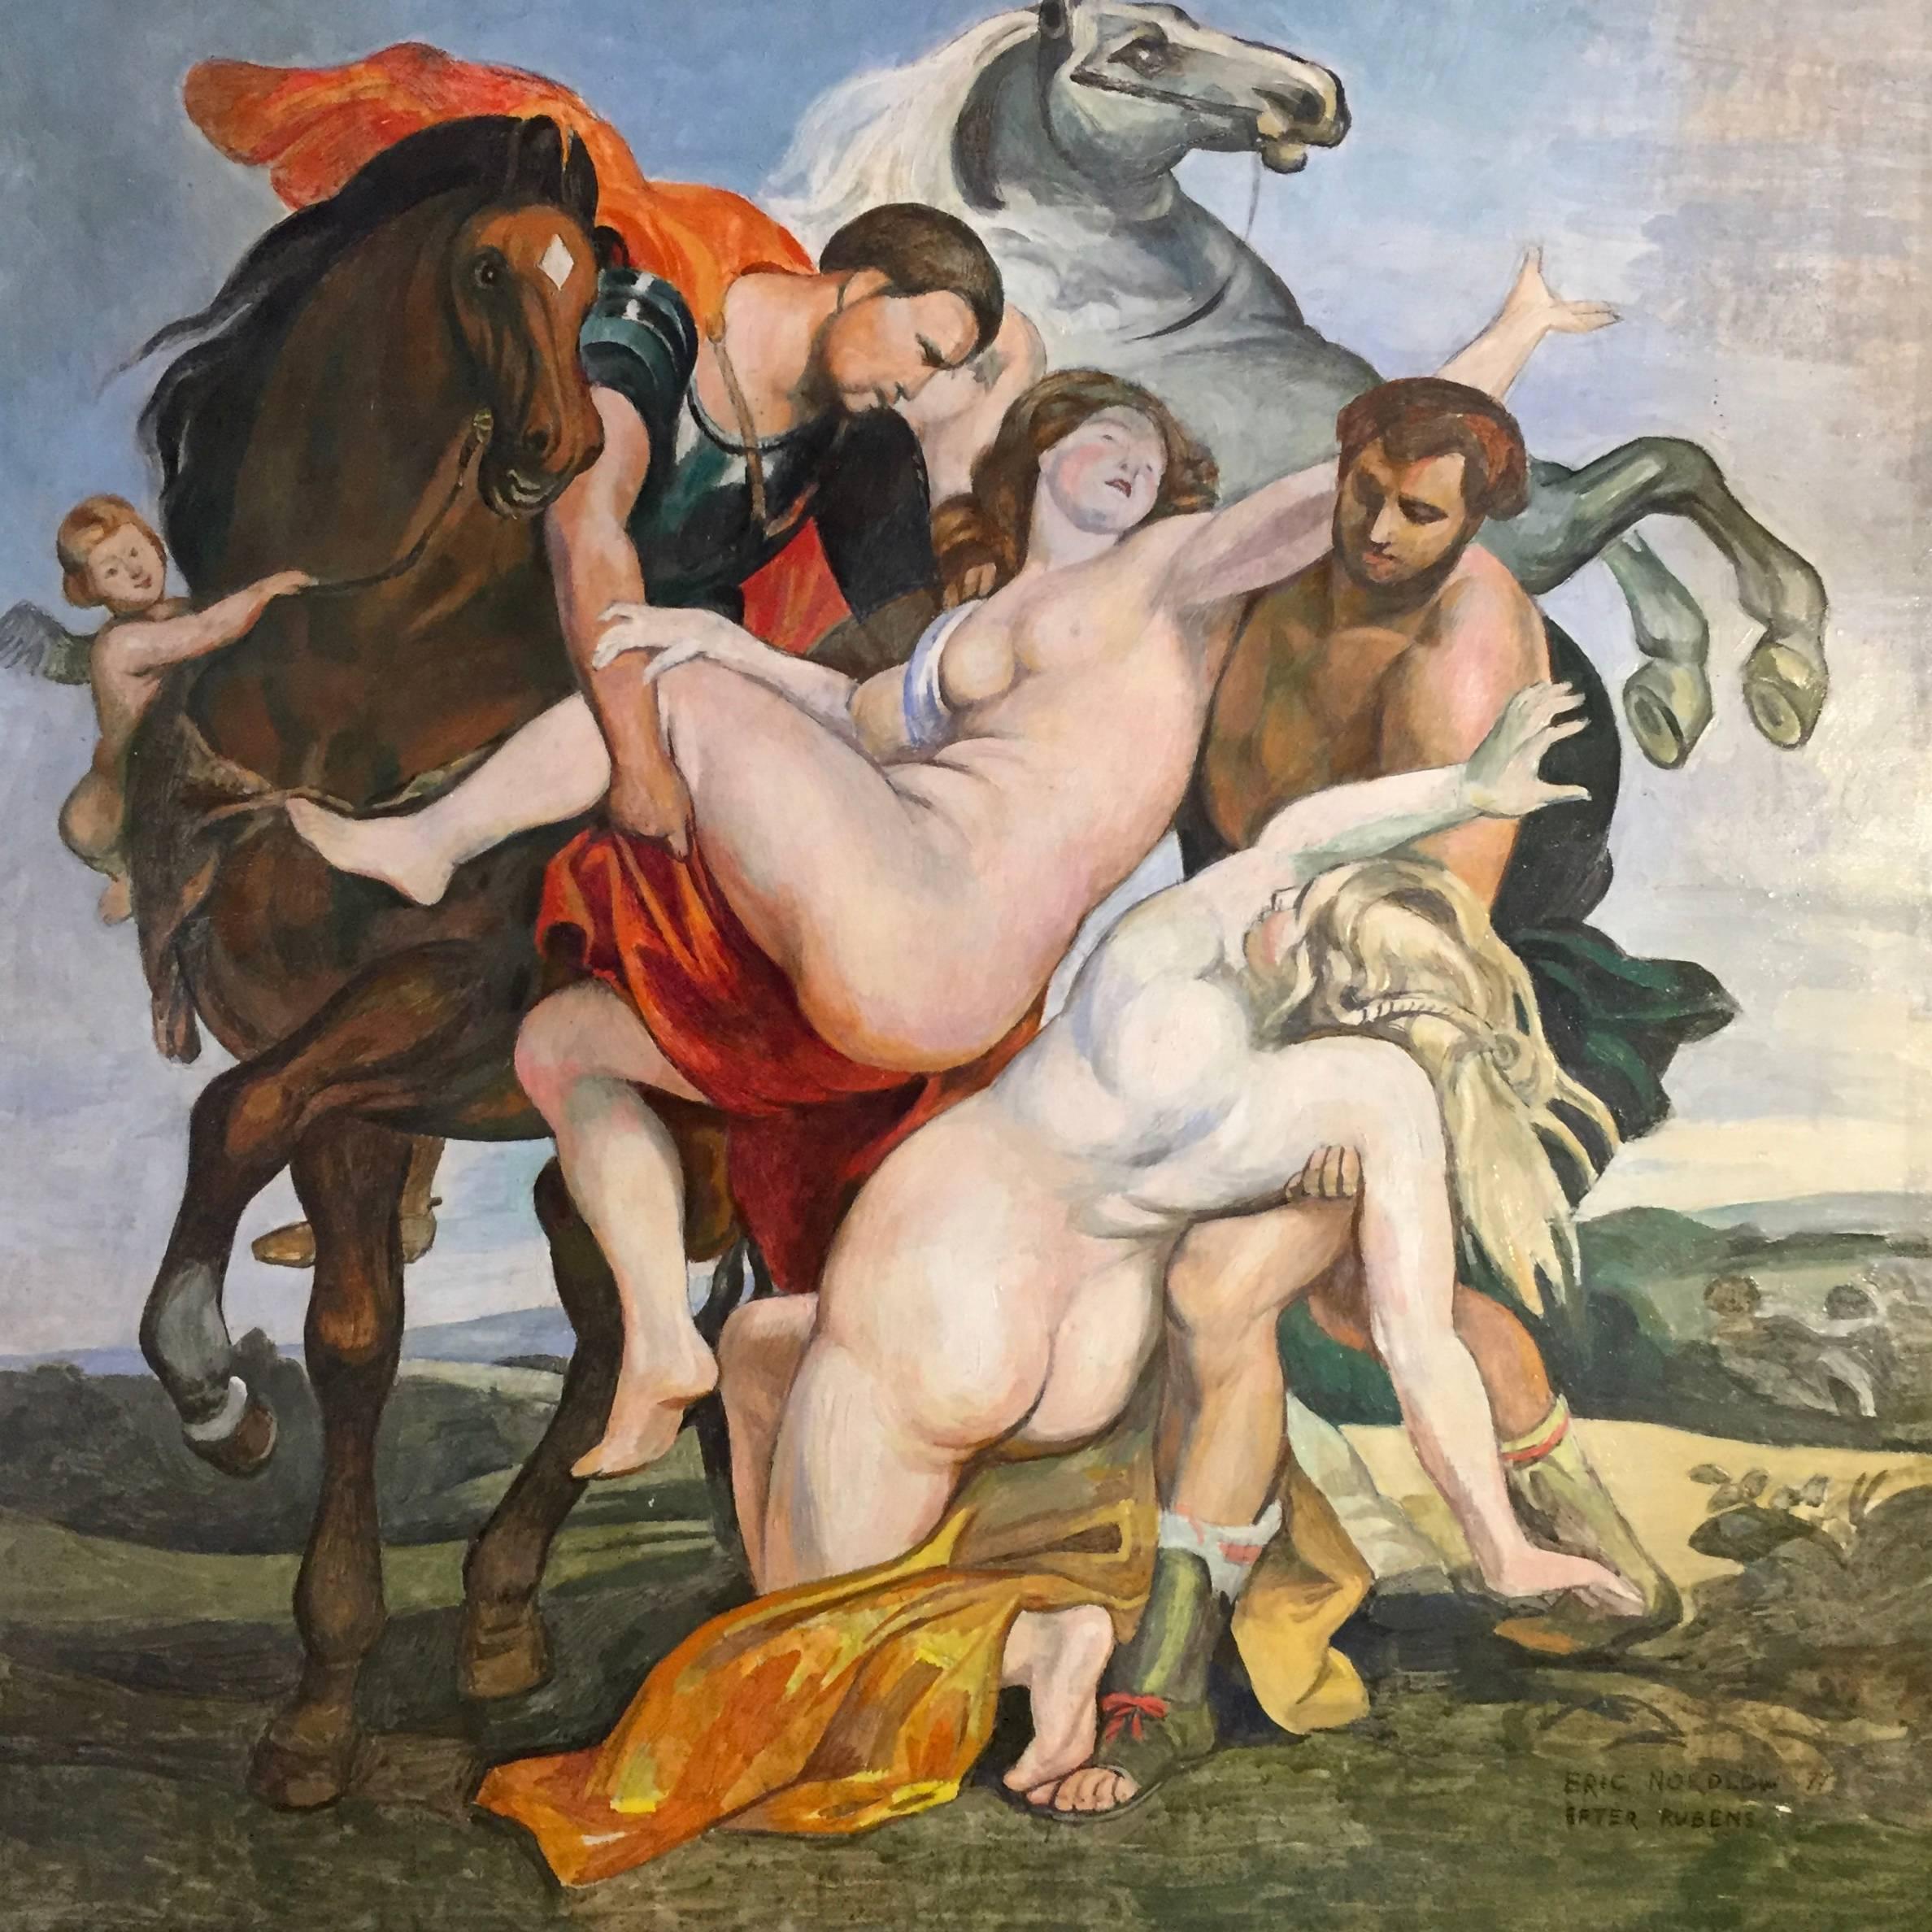 Eric Nordlöw (1908-1983) beautifully executed this painting in 1977 and is referenced after masterpiece by Peter Paul Rubens (1577-1640) titled The Descent of the Daughters of Leucippus painted in 1618, now on show in the Alte Pinakothek in Munich.